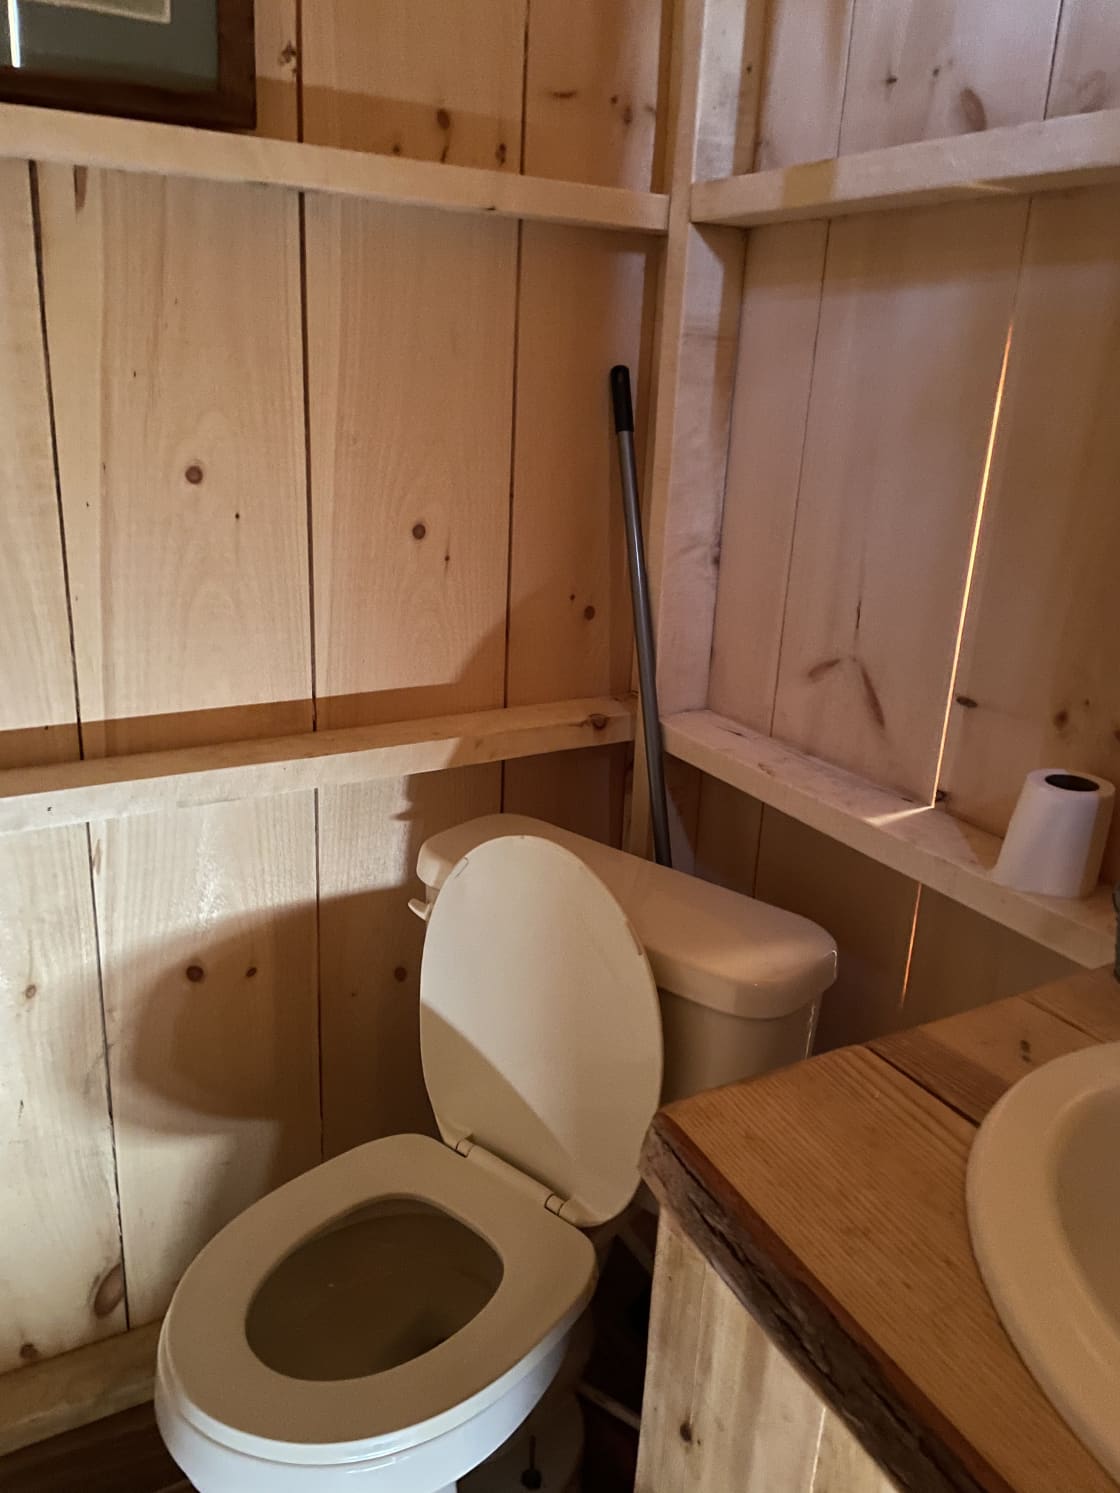 Cleanest flush toilet at a campground ever